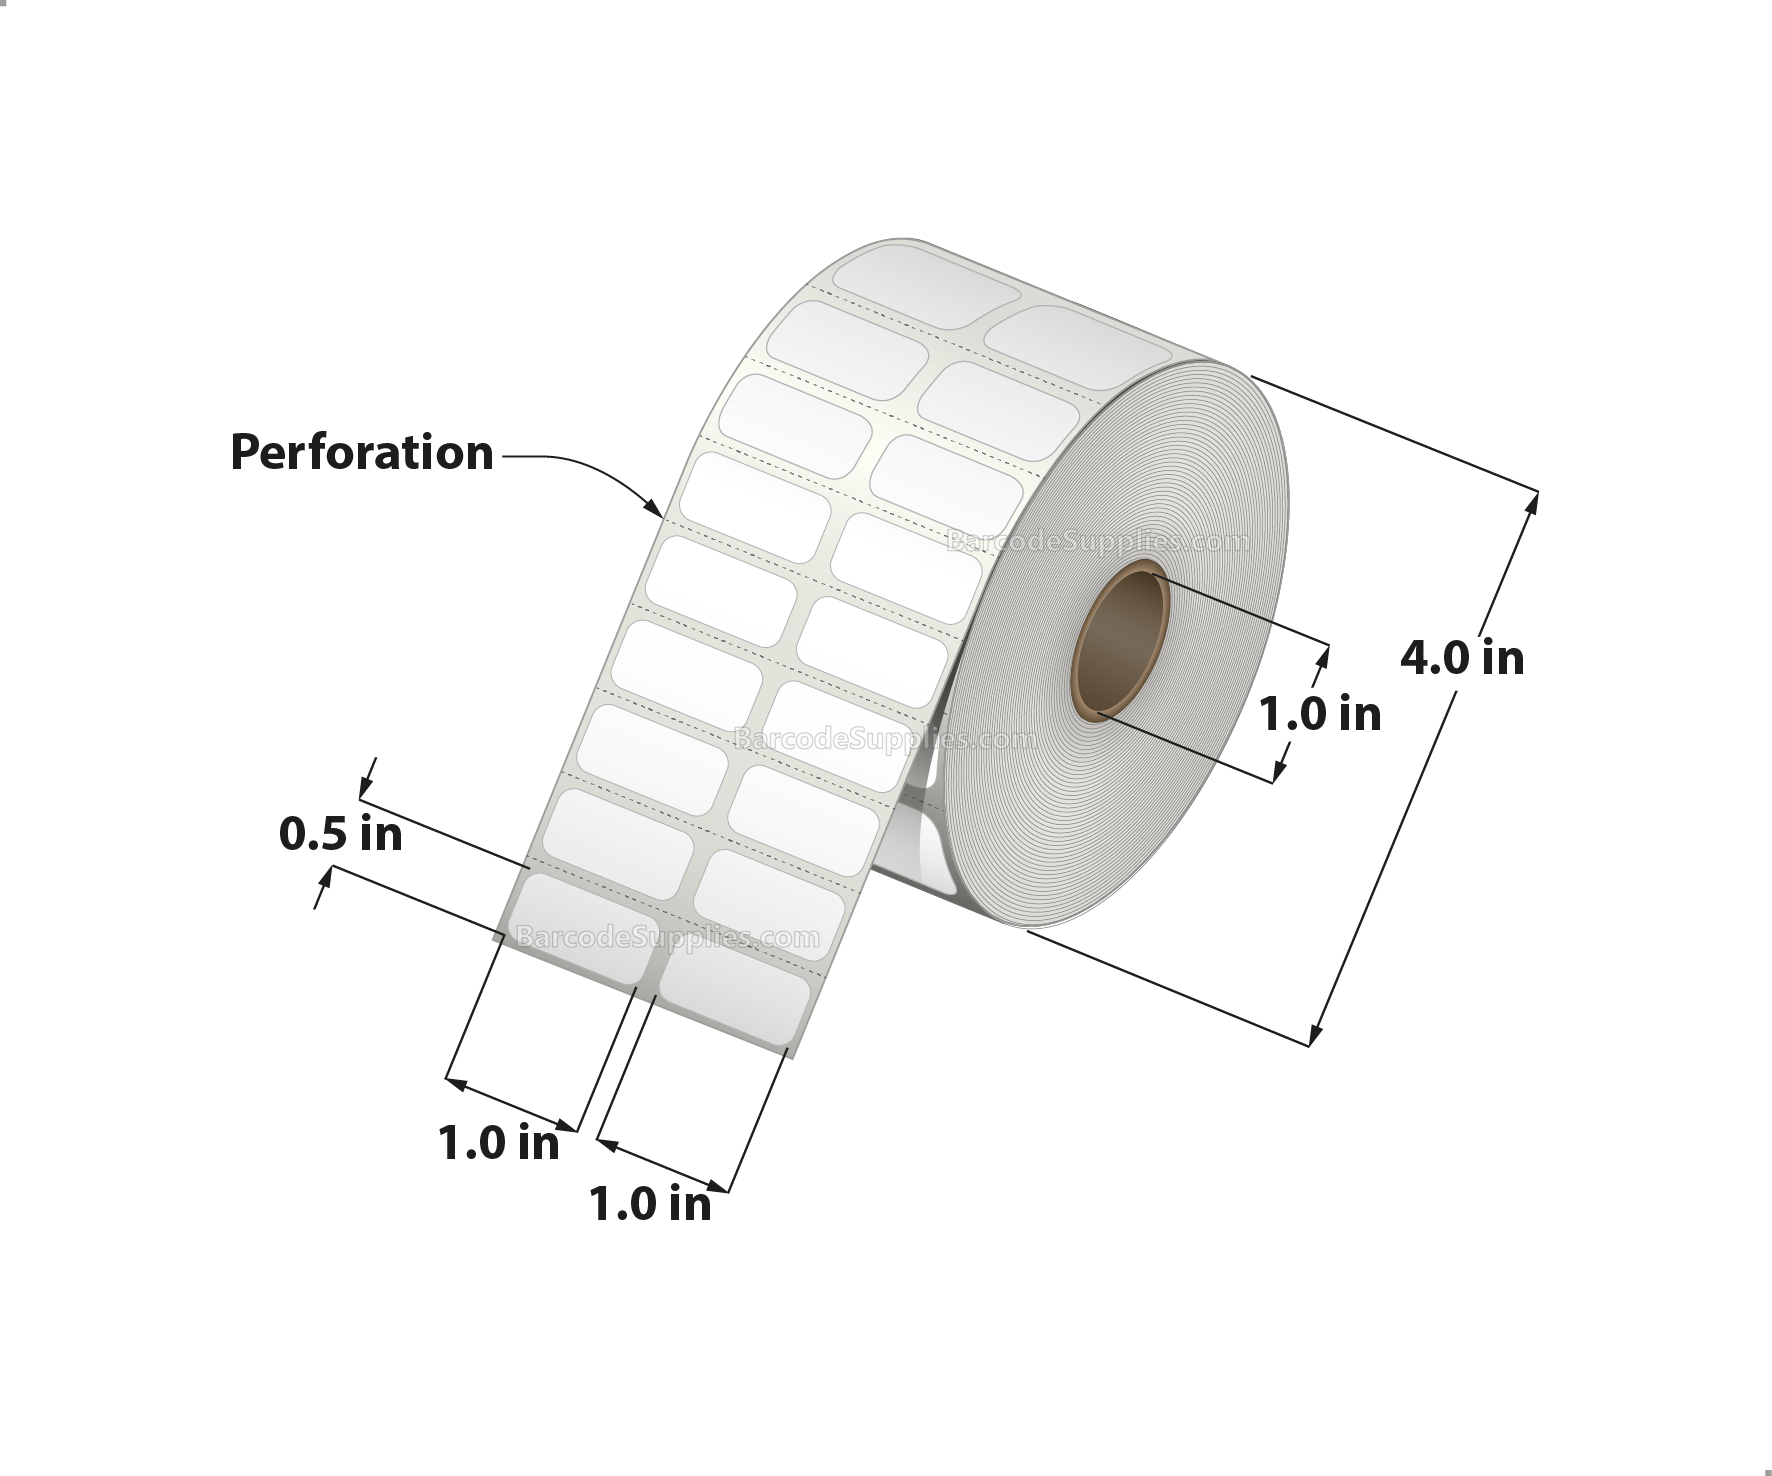 1 x 0.5 Direct Thermal White Labels With Acrylic Adhesive - Perforated - 4900 Labels Per Roll - Carton Of 12 Rolls - 58800 Labels Total - MPN: RD-1-05-4900-1